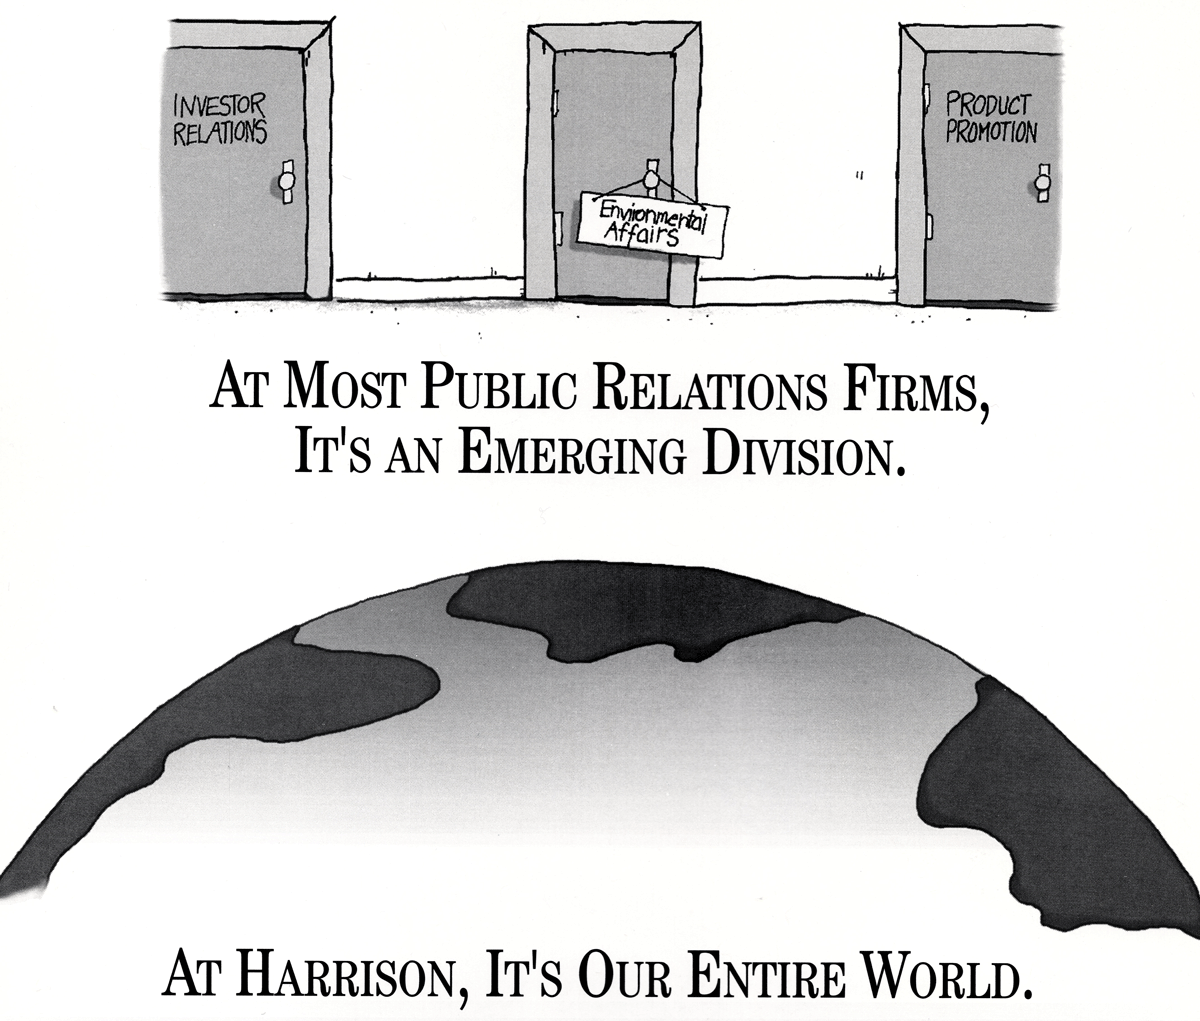 Promotional artwork for Harrison's company - "At most public relations firms, it's an emerging division [Environmental Affairs]. At Harrison, it's our entire world."